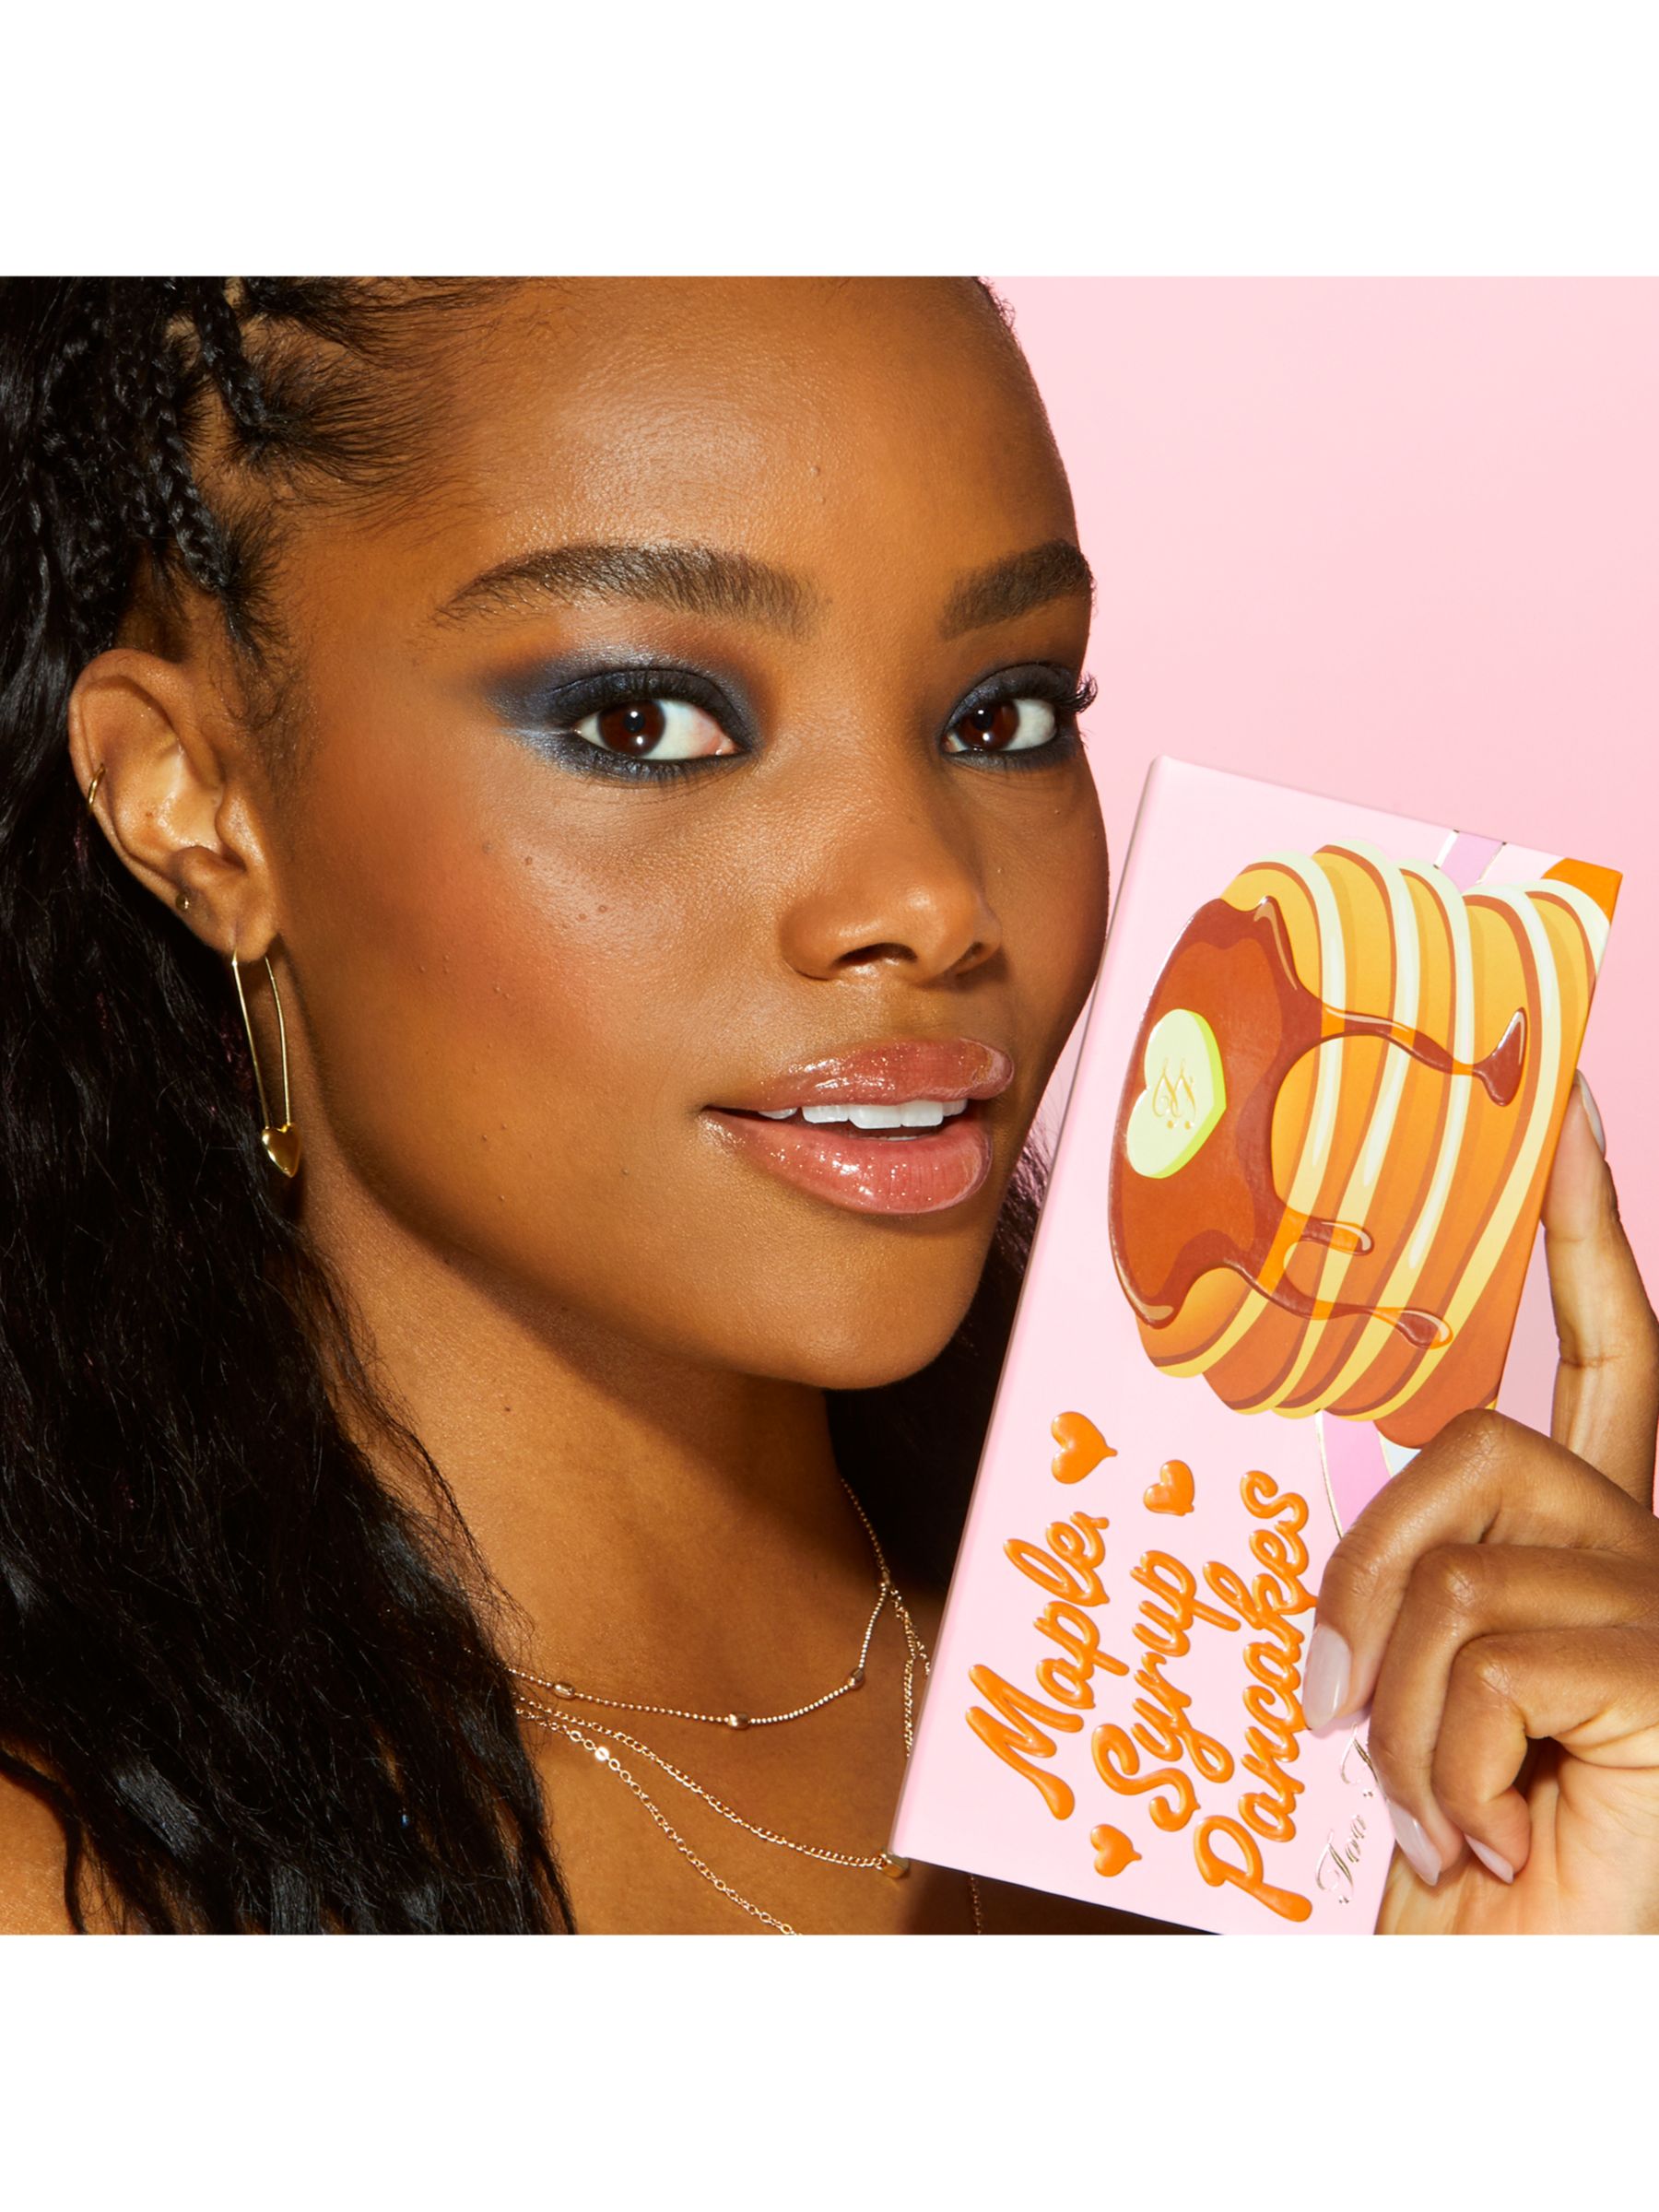 Too Faced Limited Edition Eyeshadow Palette, Maple Syrup Pancakes 8